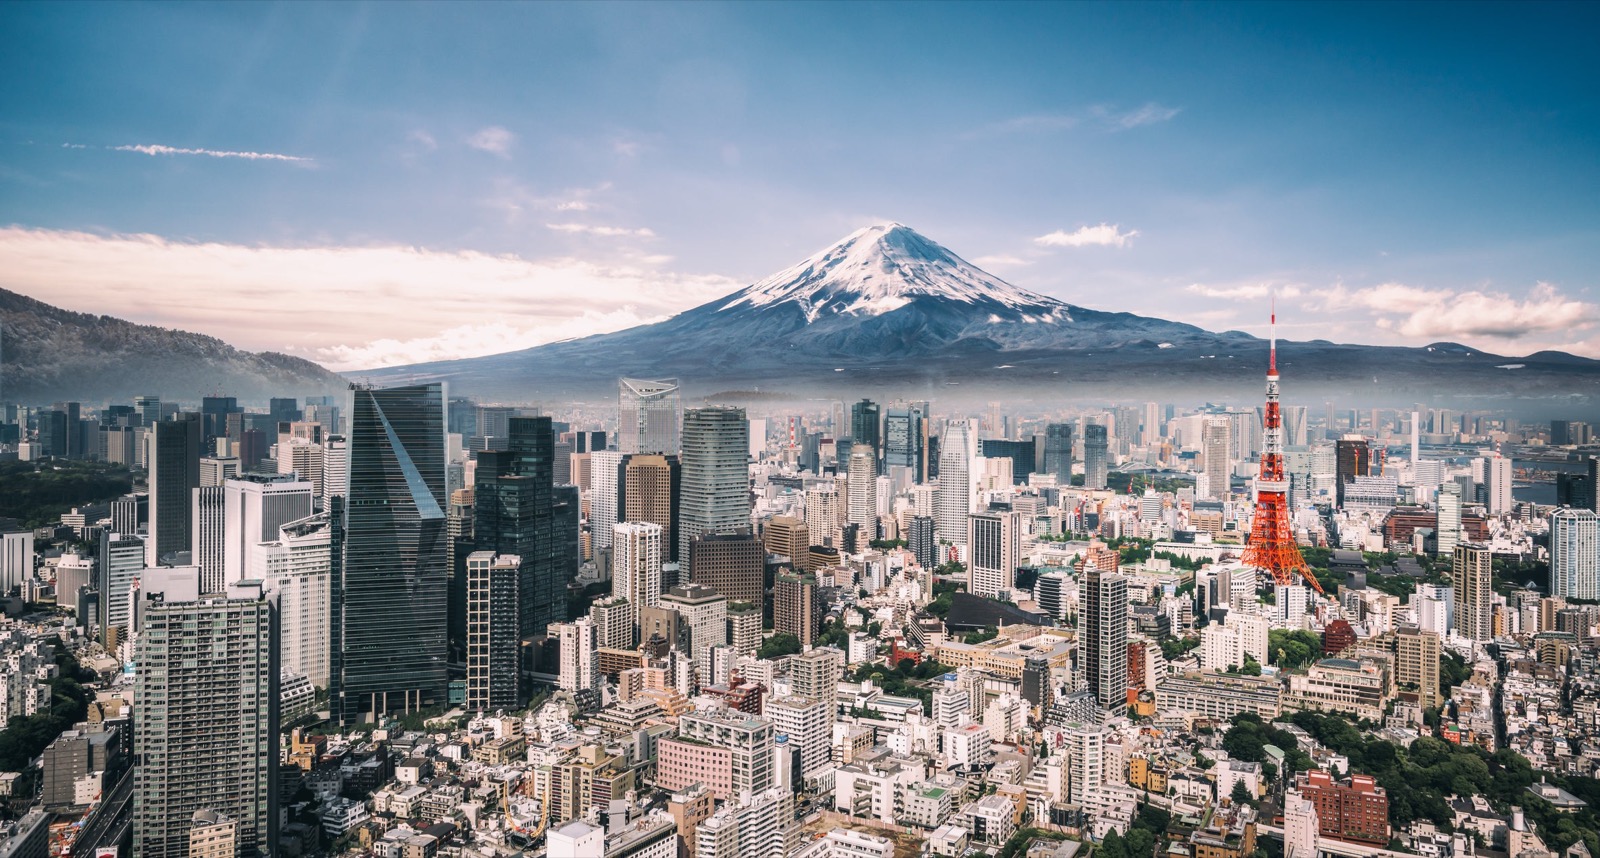 We’ll Honestly Be Impressed If You Score 17/22 on This General Knowledge Quiz Tokyo Tower Mount Fuji Japan